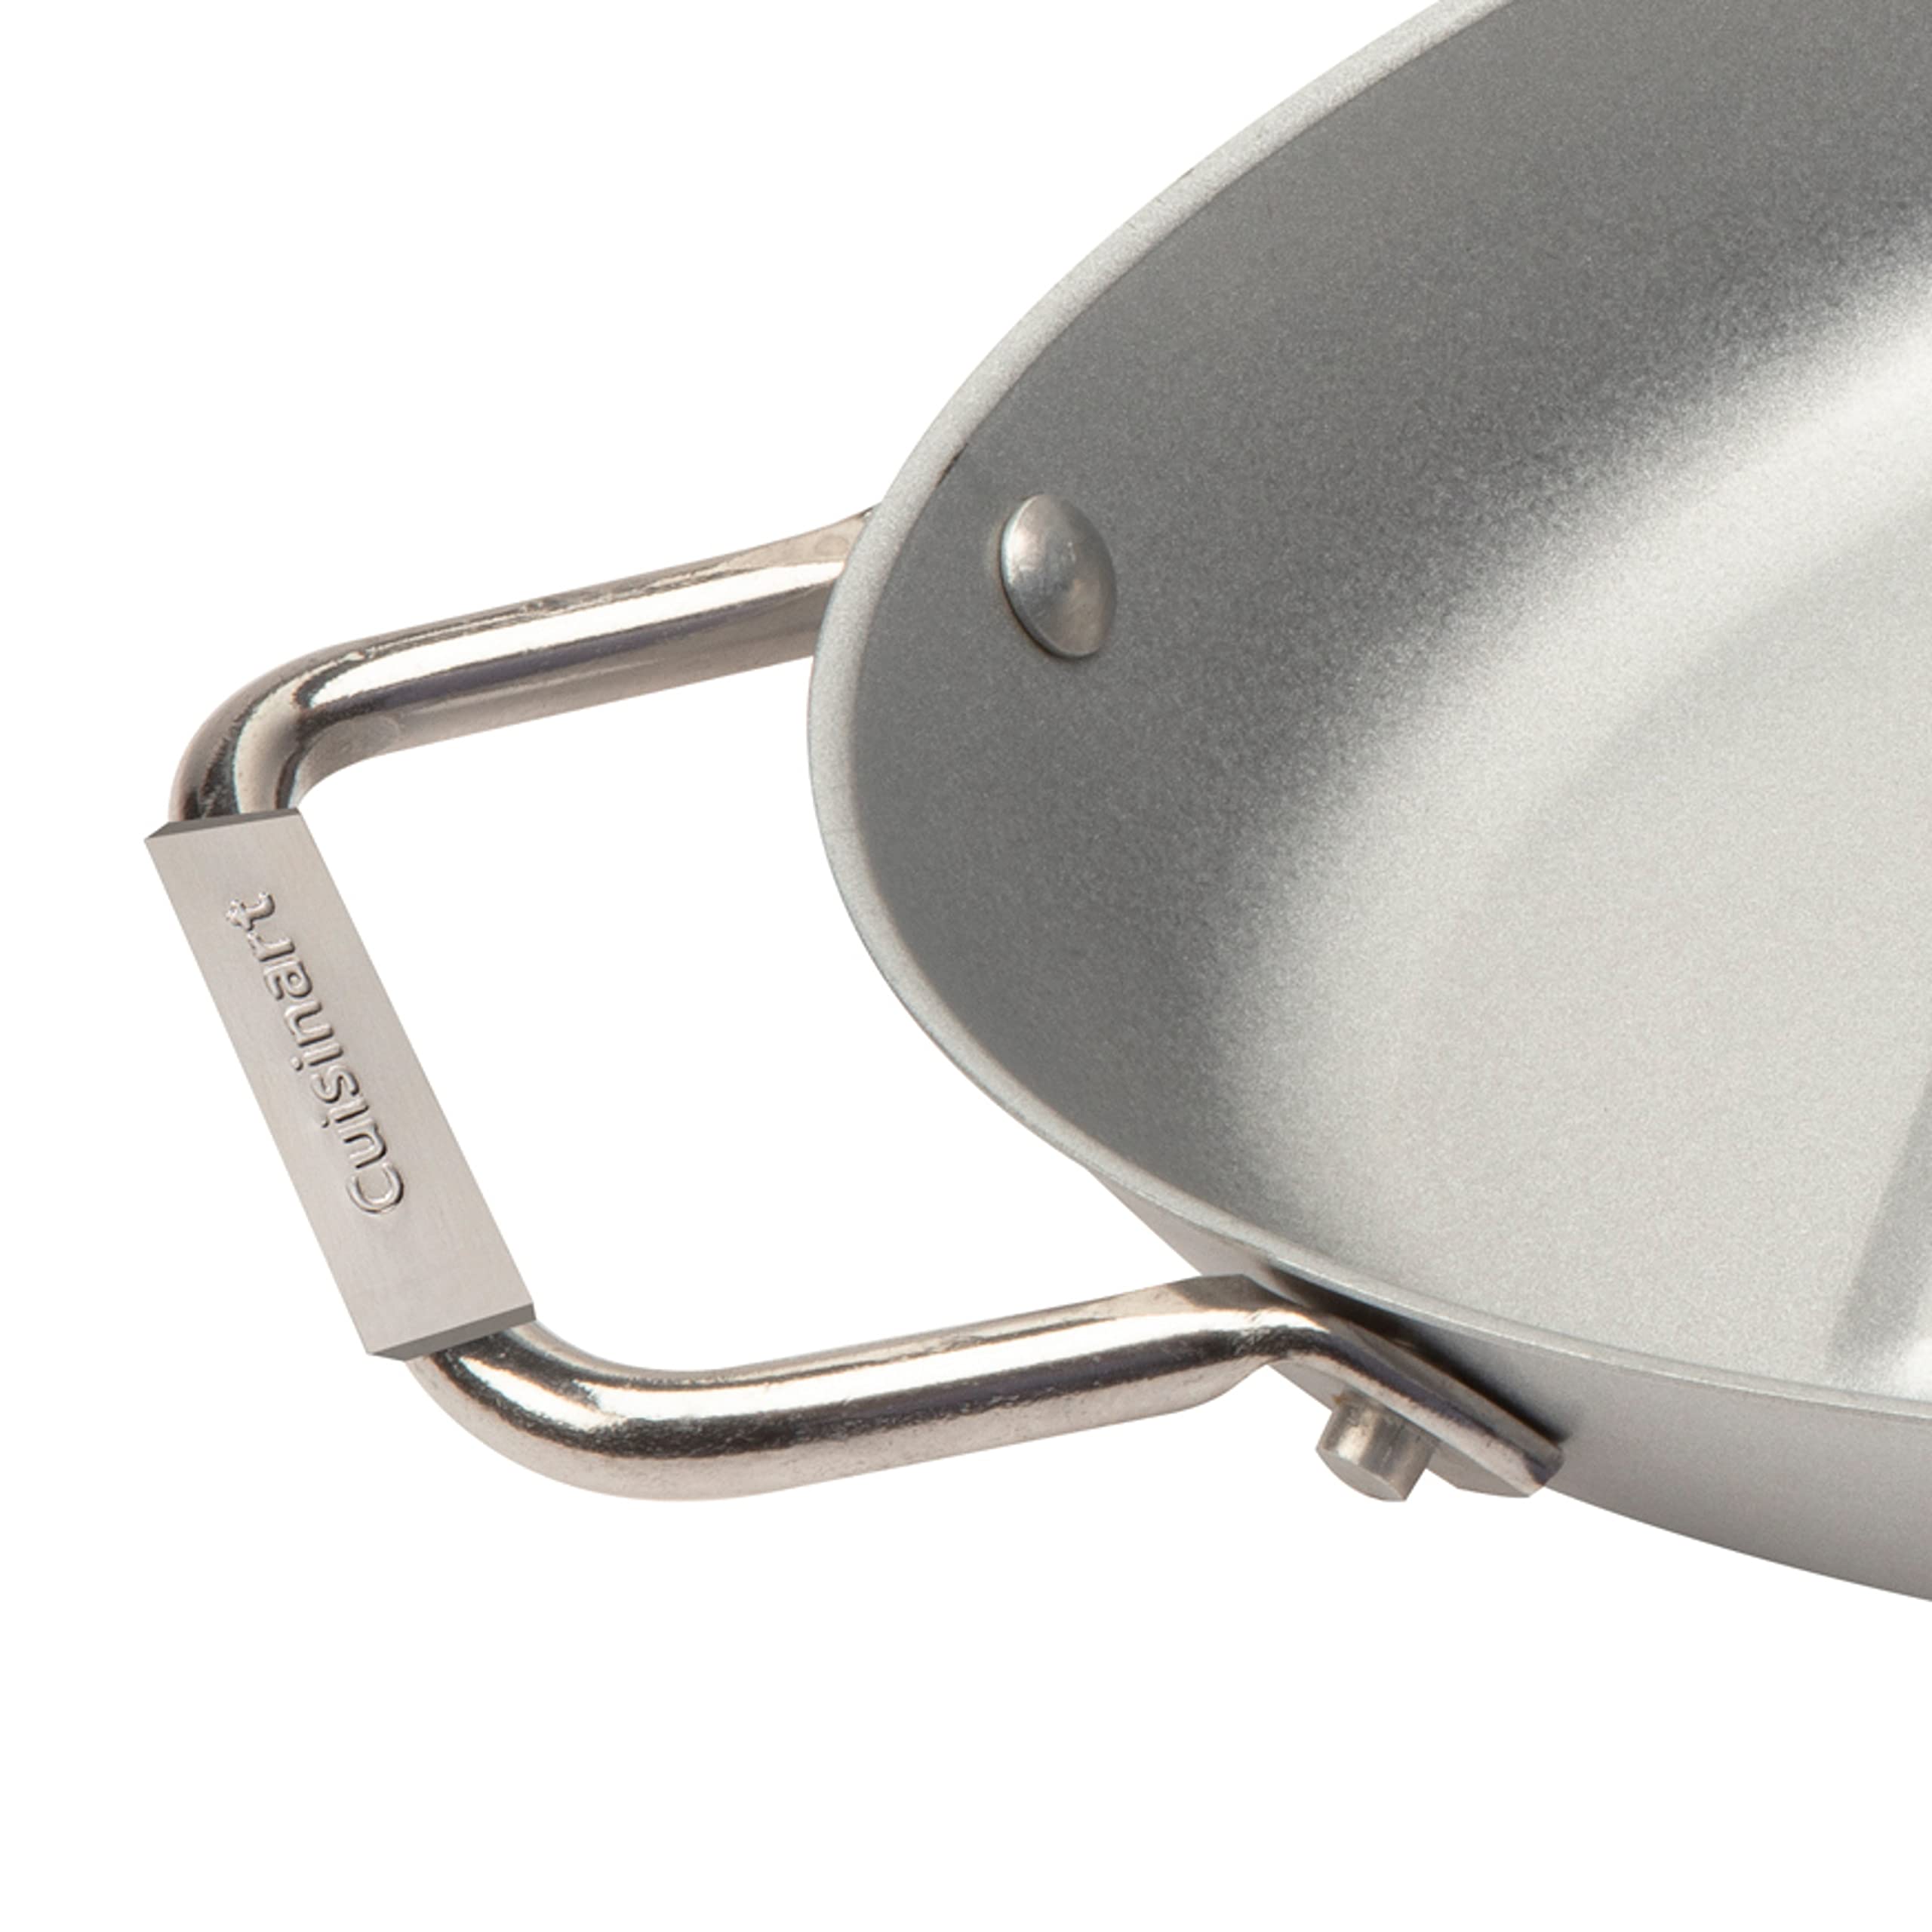 Cuisinart CNPO-700 Non-Stick, Oval Grilling Pan, 13